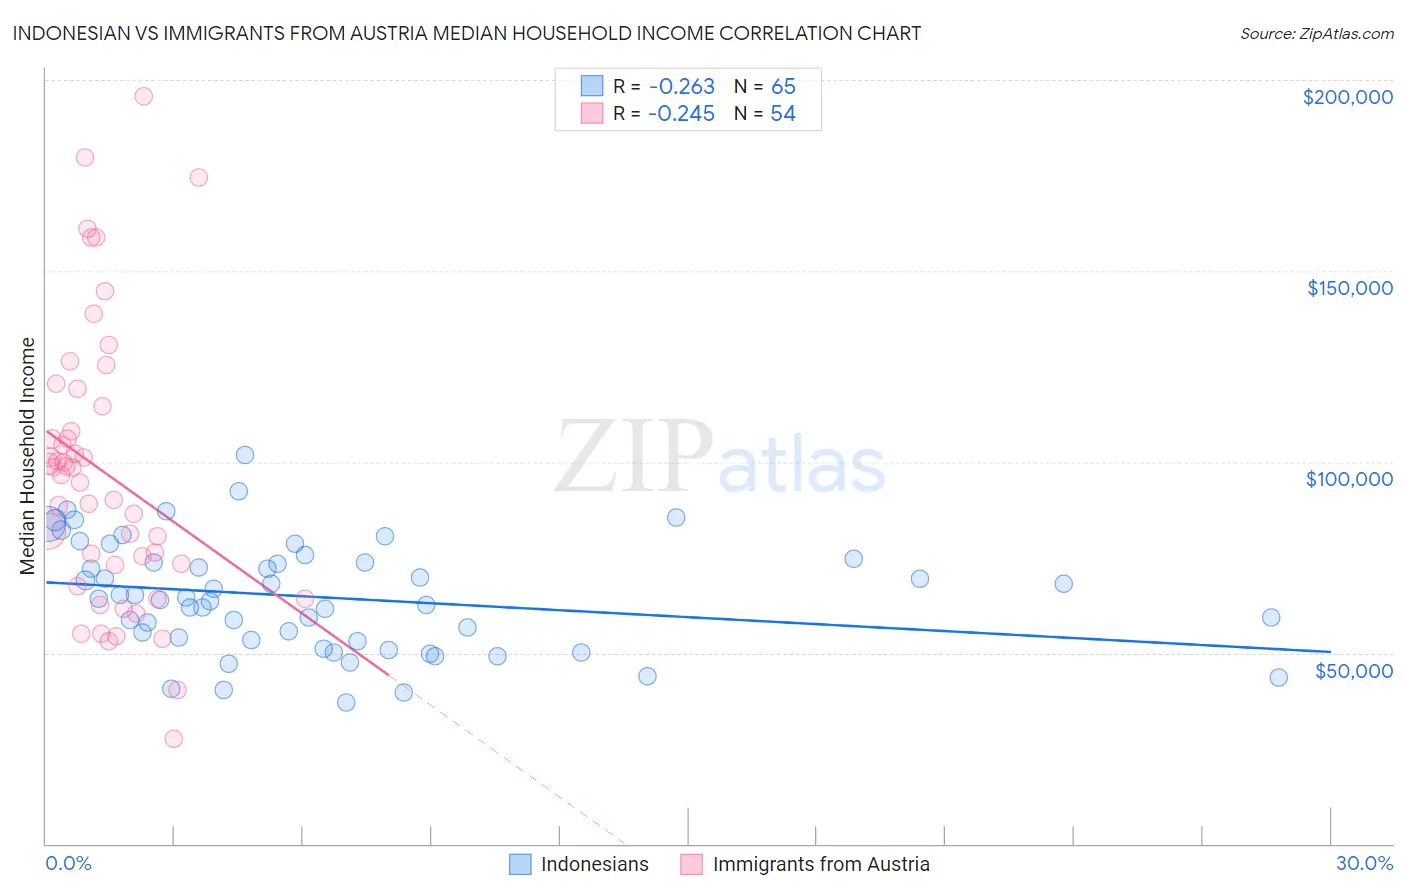 Indonesian vs Immigrants from Austria Median Household Income